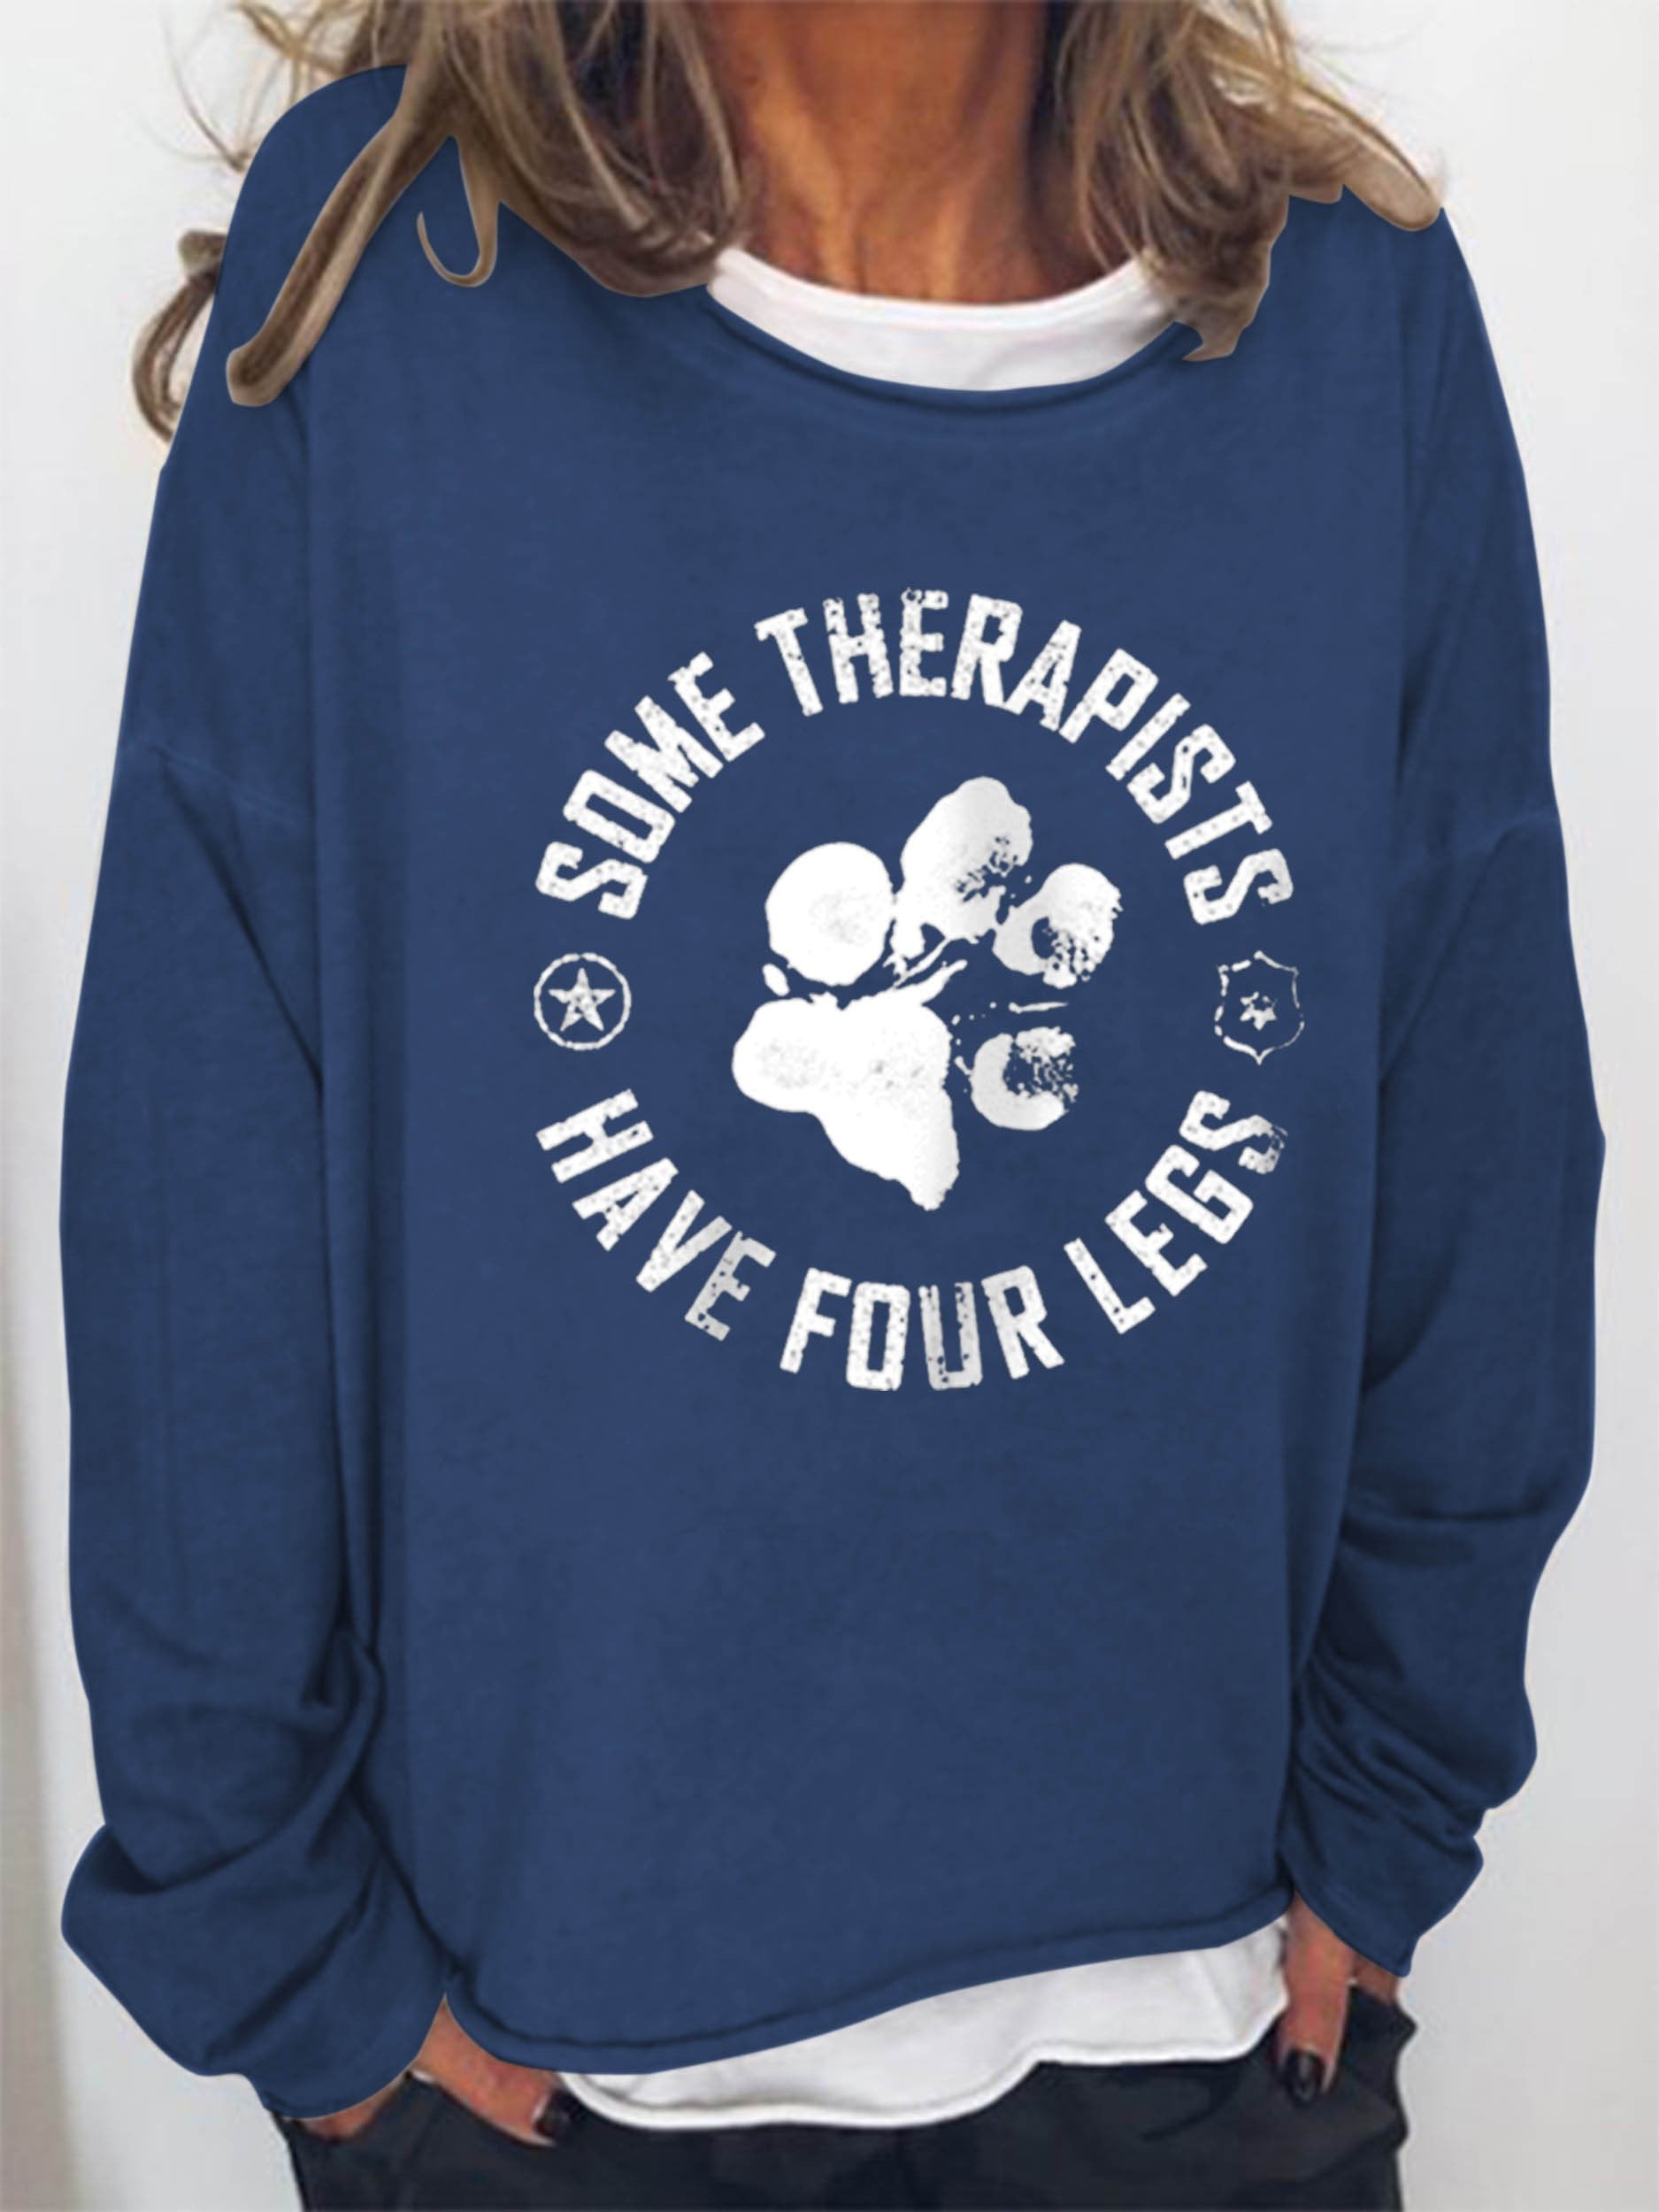 Women Some Therapists Have Four Legs Long Sleeve Top